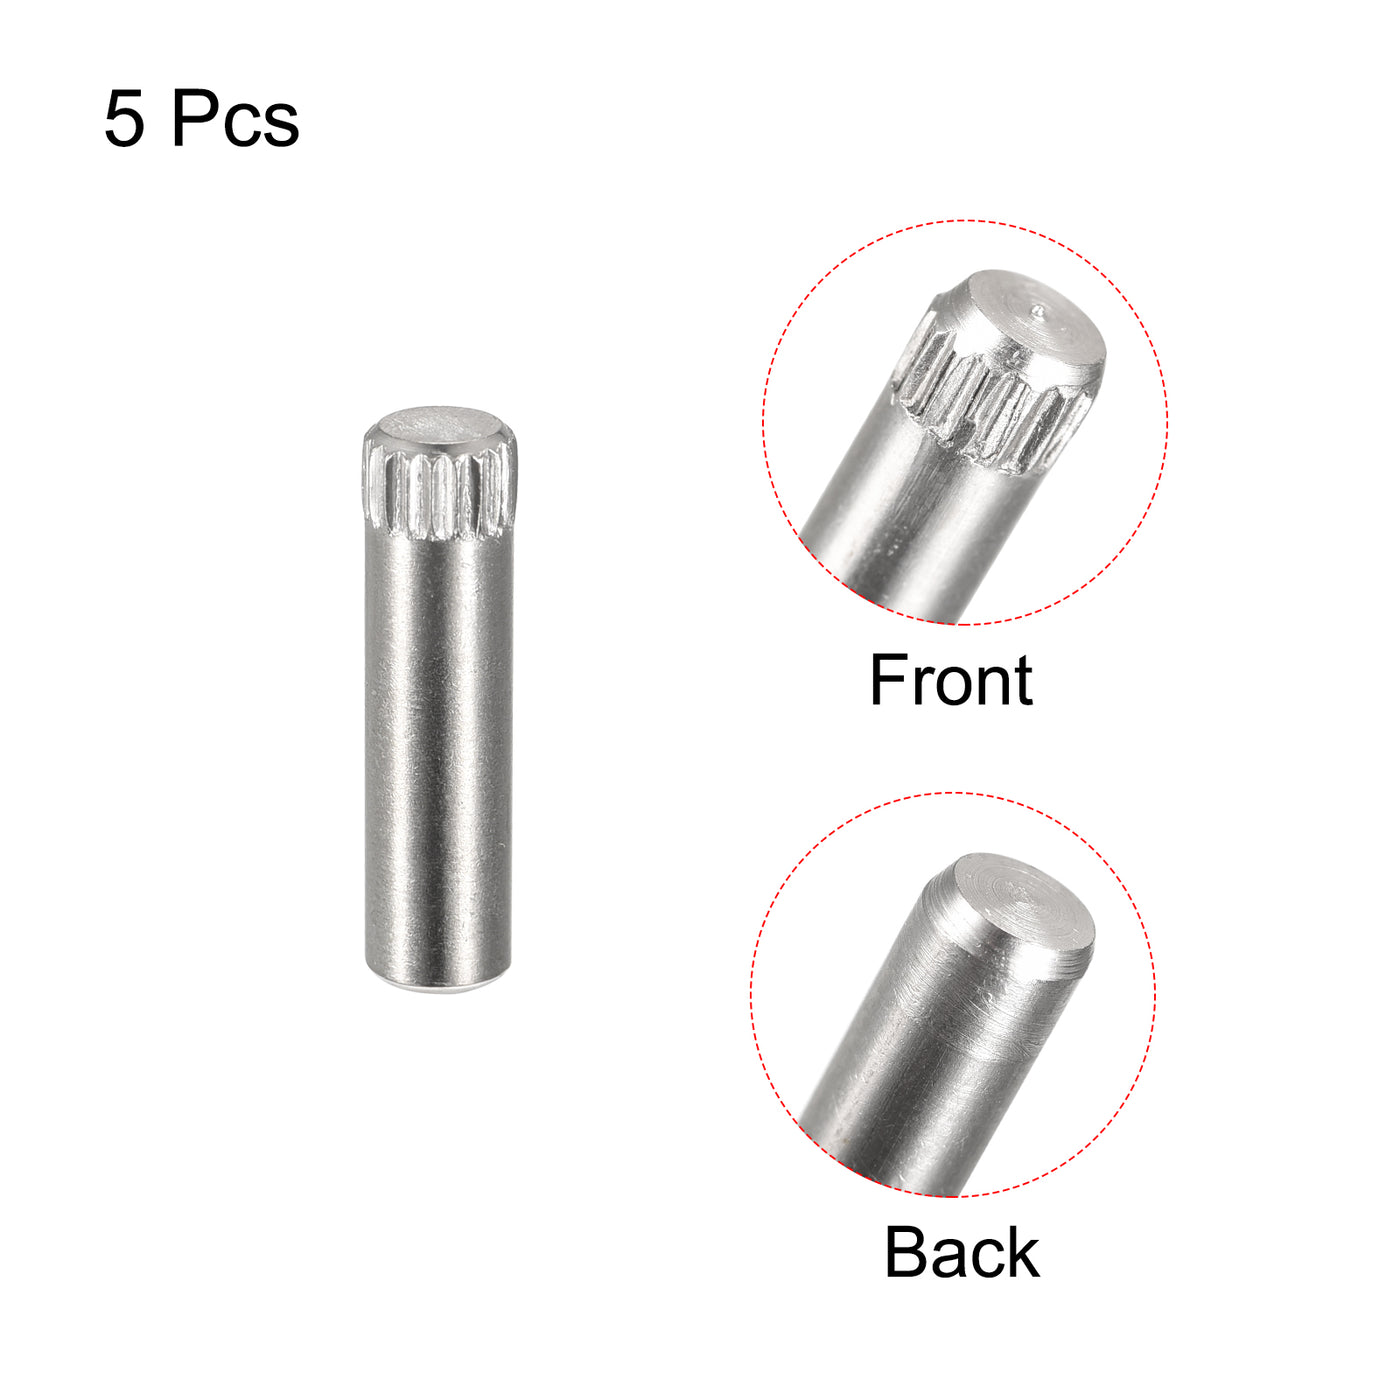 uxcell Uxcell 5x20mm 304 Stainless Steel Dowel Pins, 5Pcs Knurled Head Flat End Dowel Pin